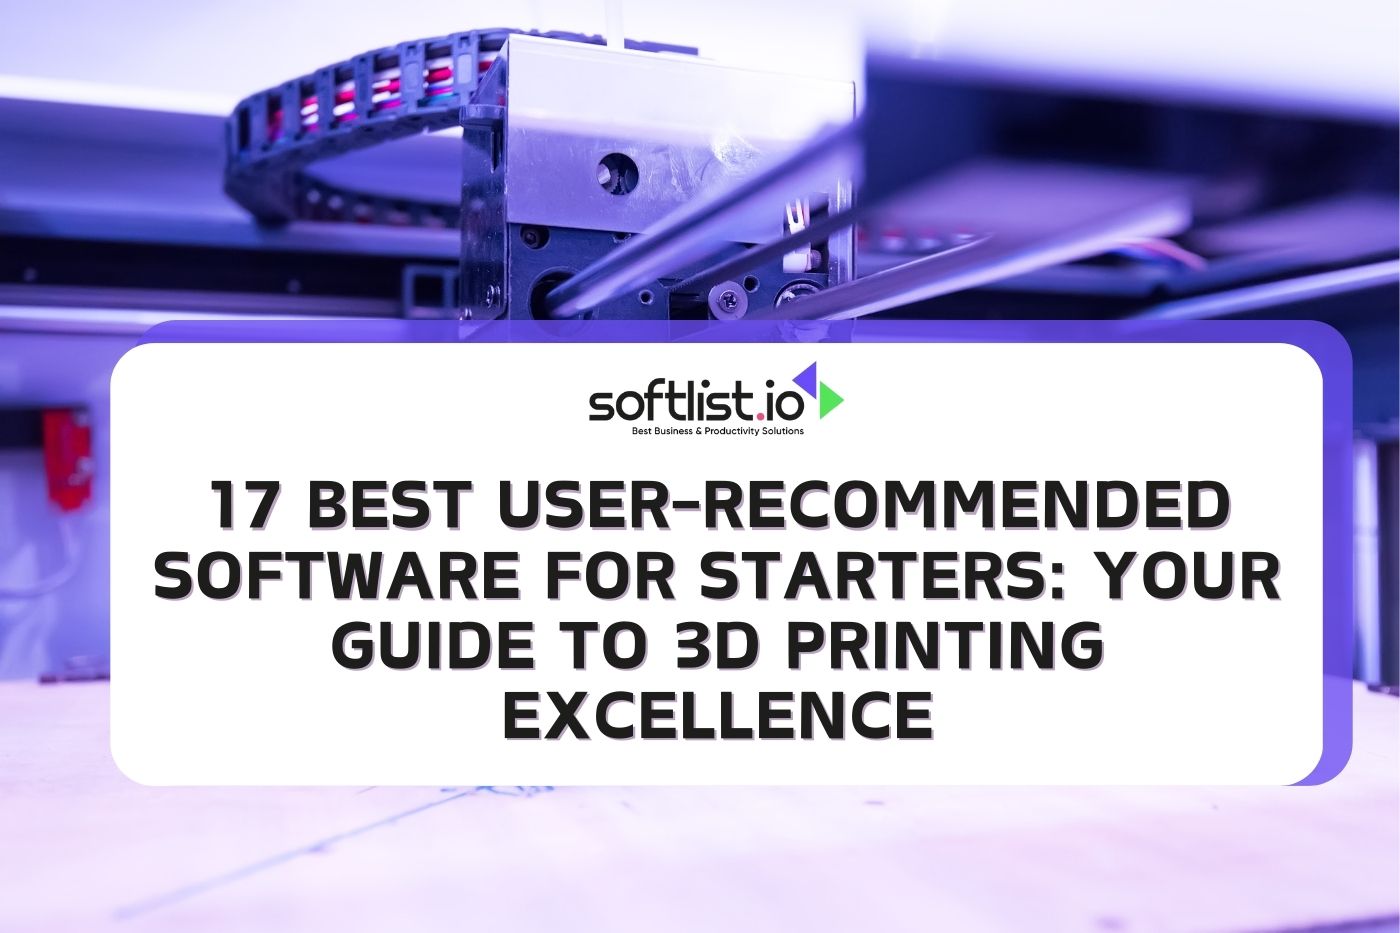 17 Best User-Recommended Software for Starters: Your Guide to 3D Printing Excellence